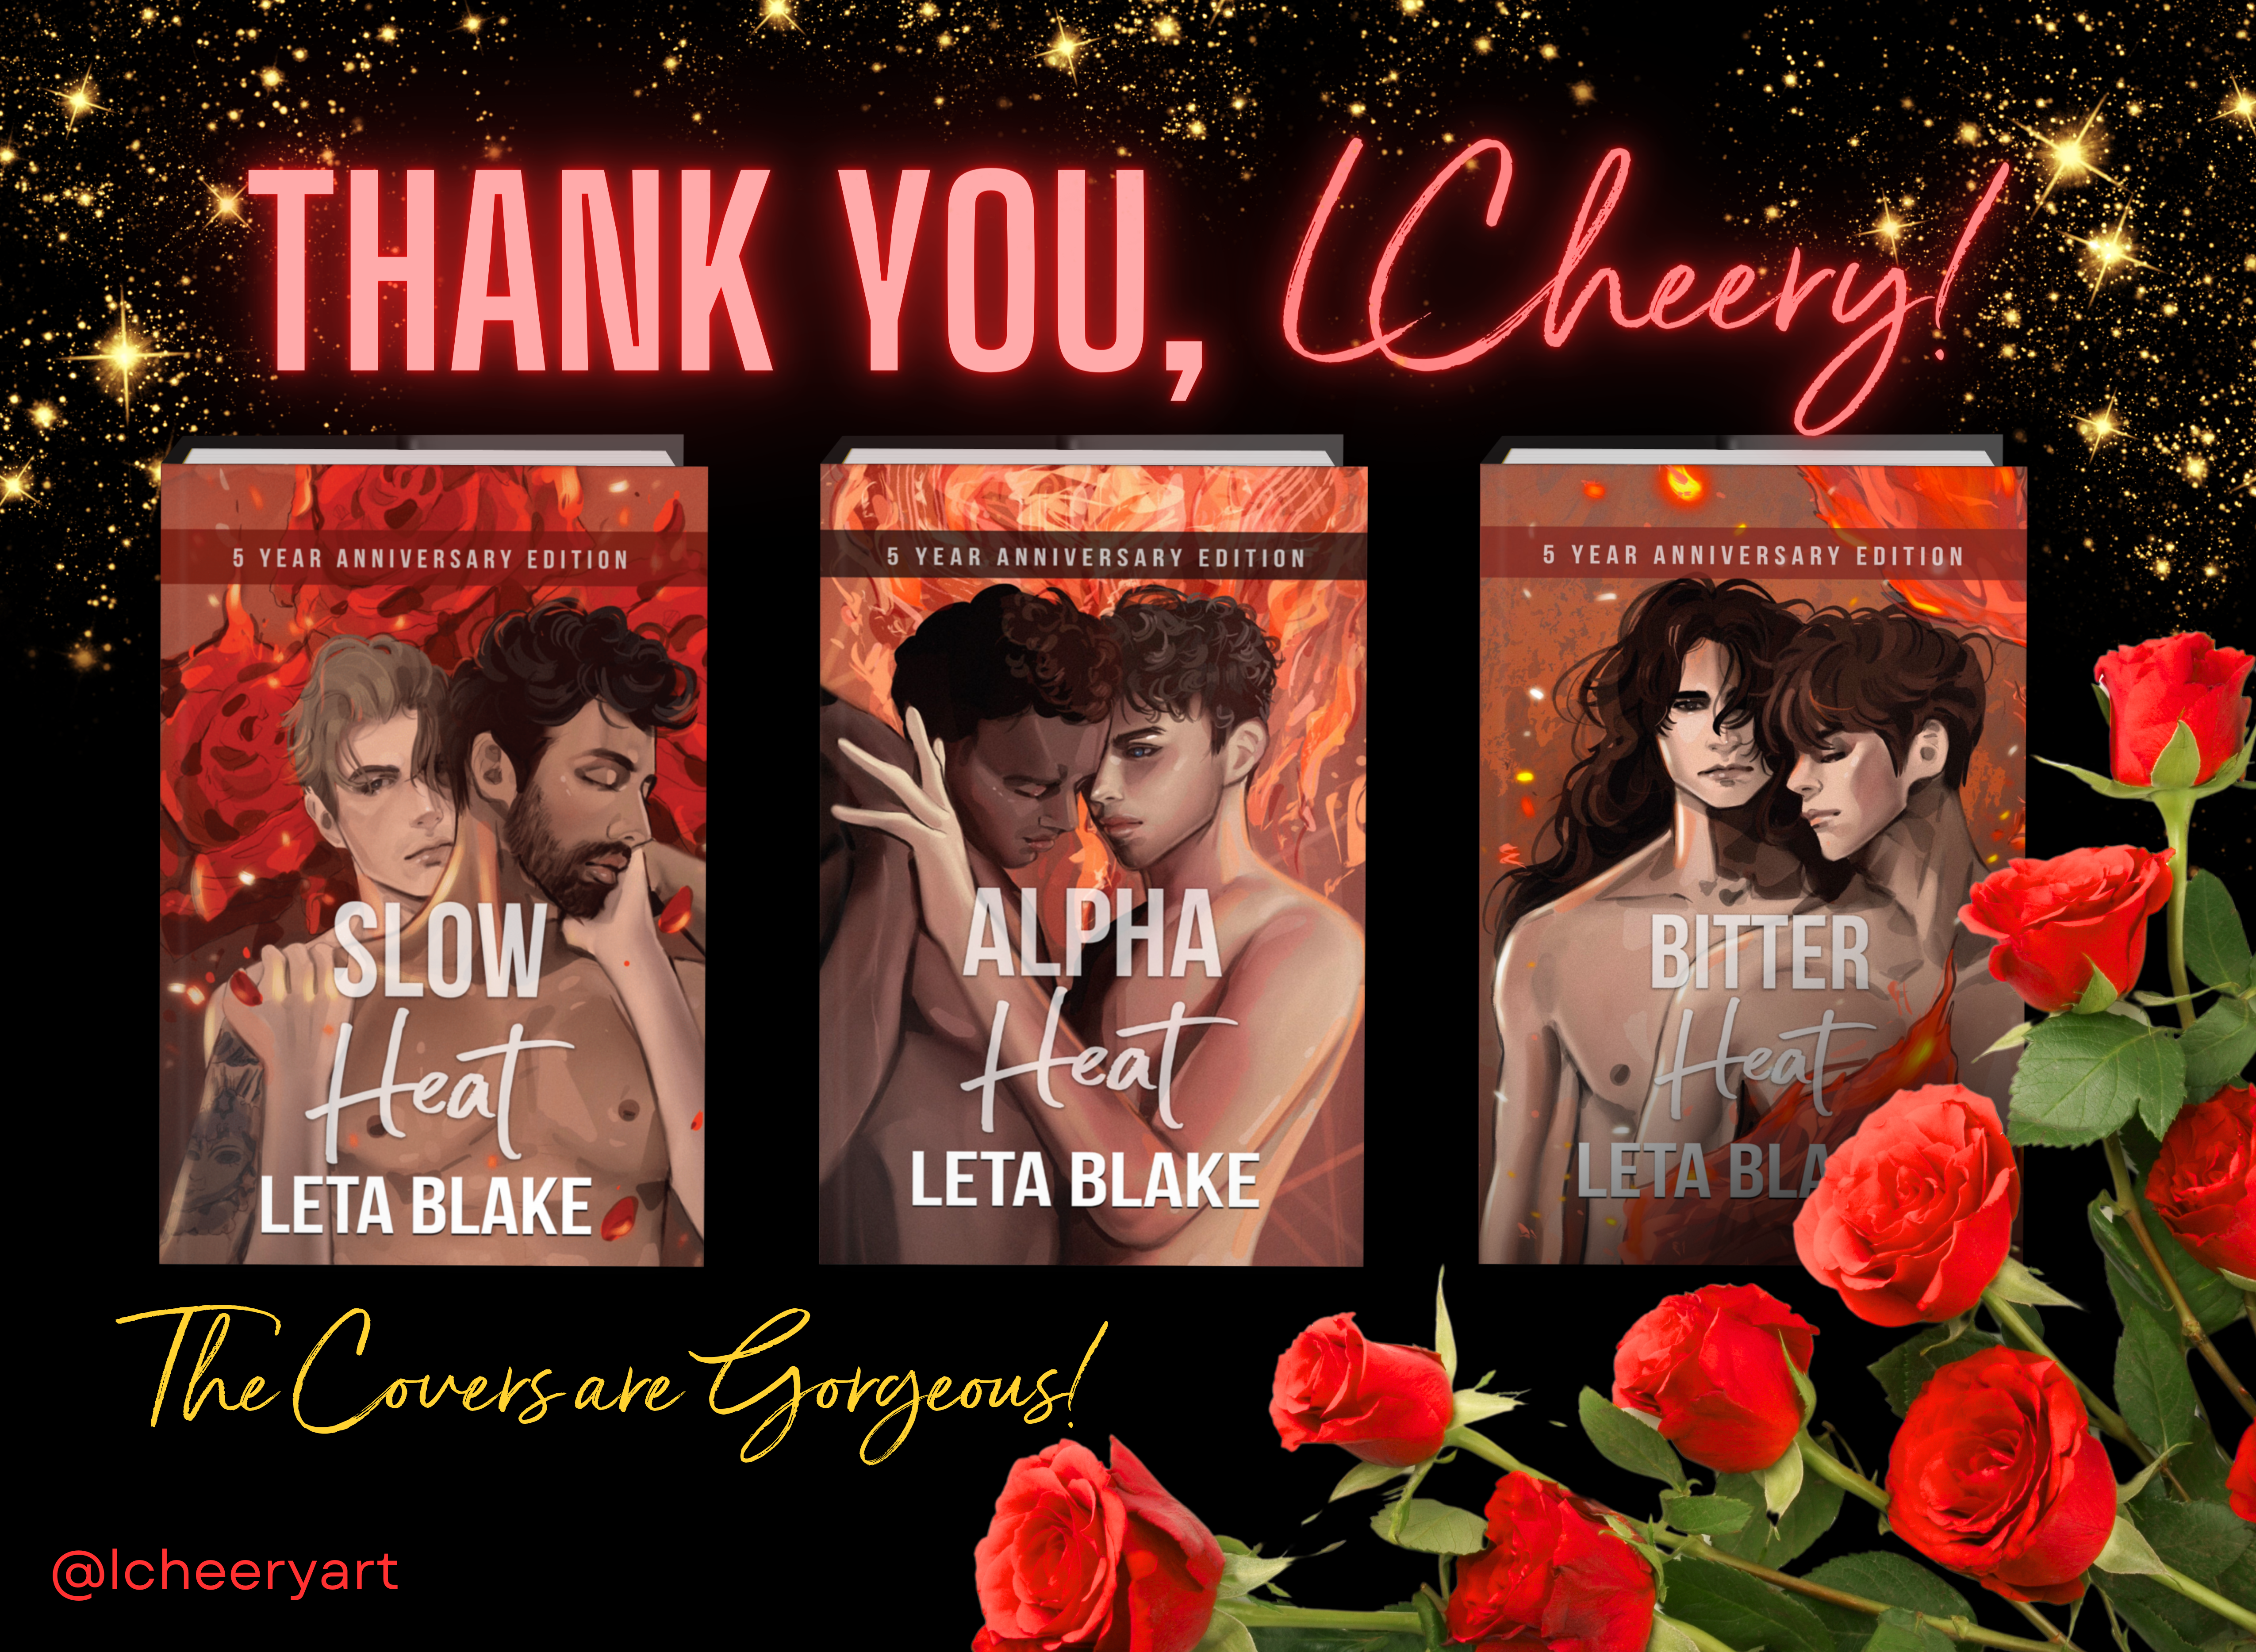 Image is three books of the Heat of Love series on a black and glittery gold background with red roses in the foreground. Each of the three book covers have artistic renderings of a male couple on an abstract fiery background. Words on the image say "Thank you, LCheery! The covers are gorgeous!"